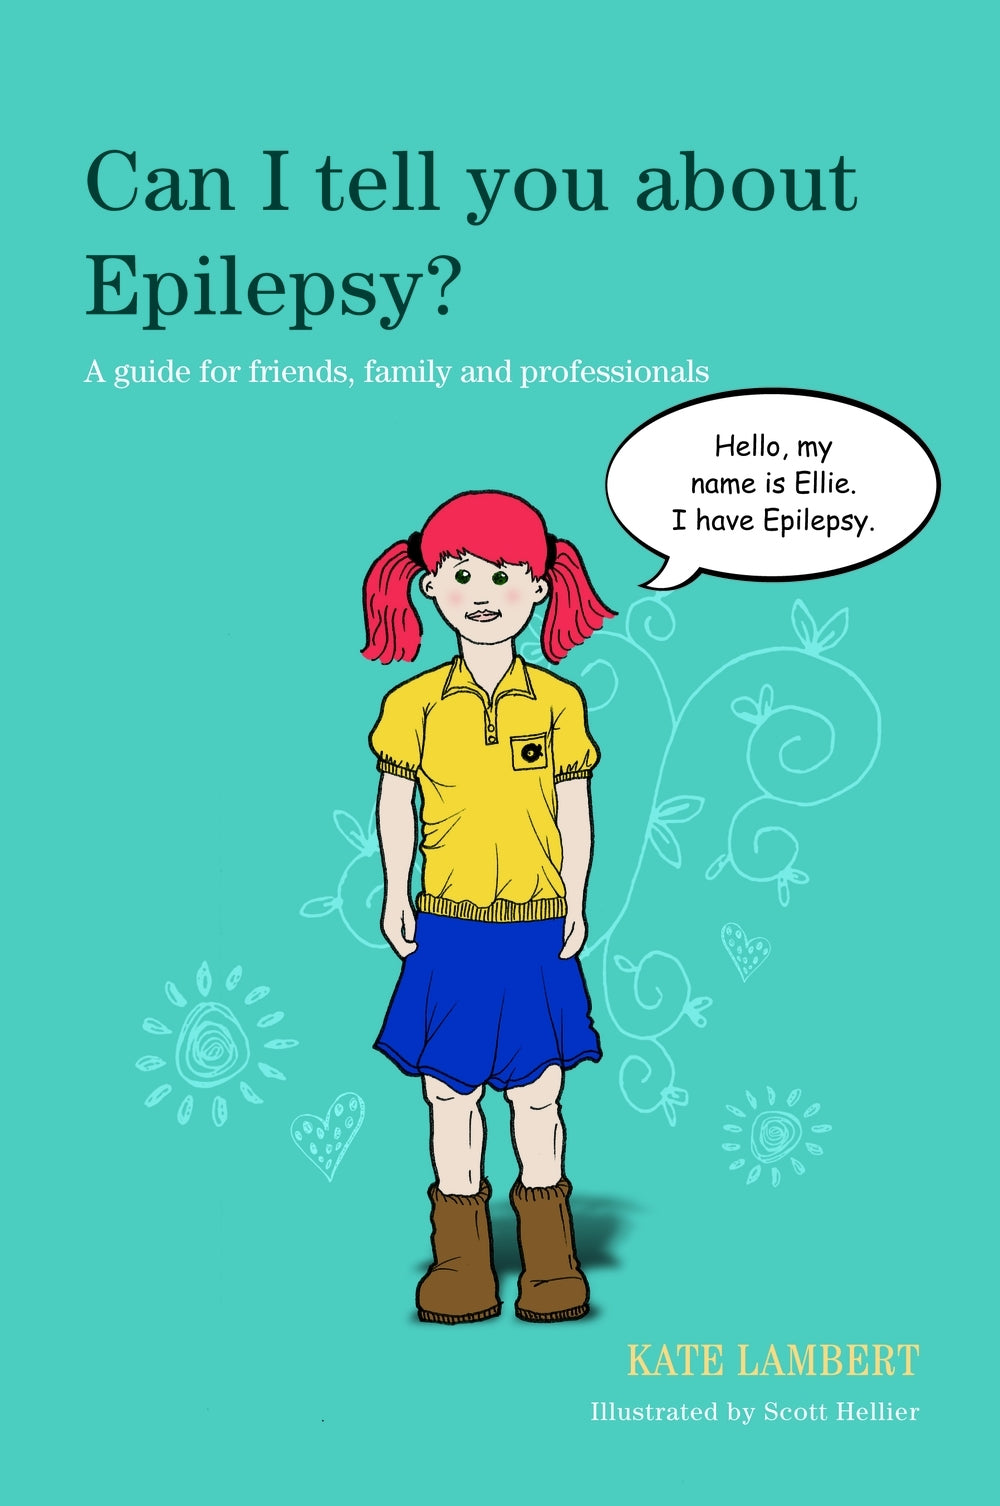 Can I tell you about Epilepsy? by Scott Hellier, Kate Lambert